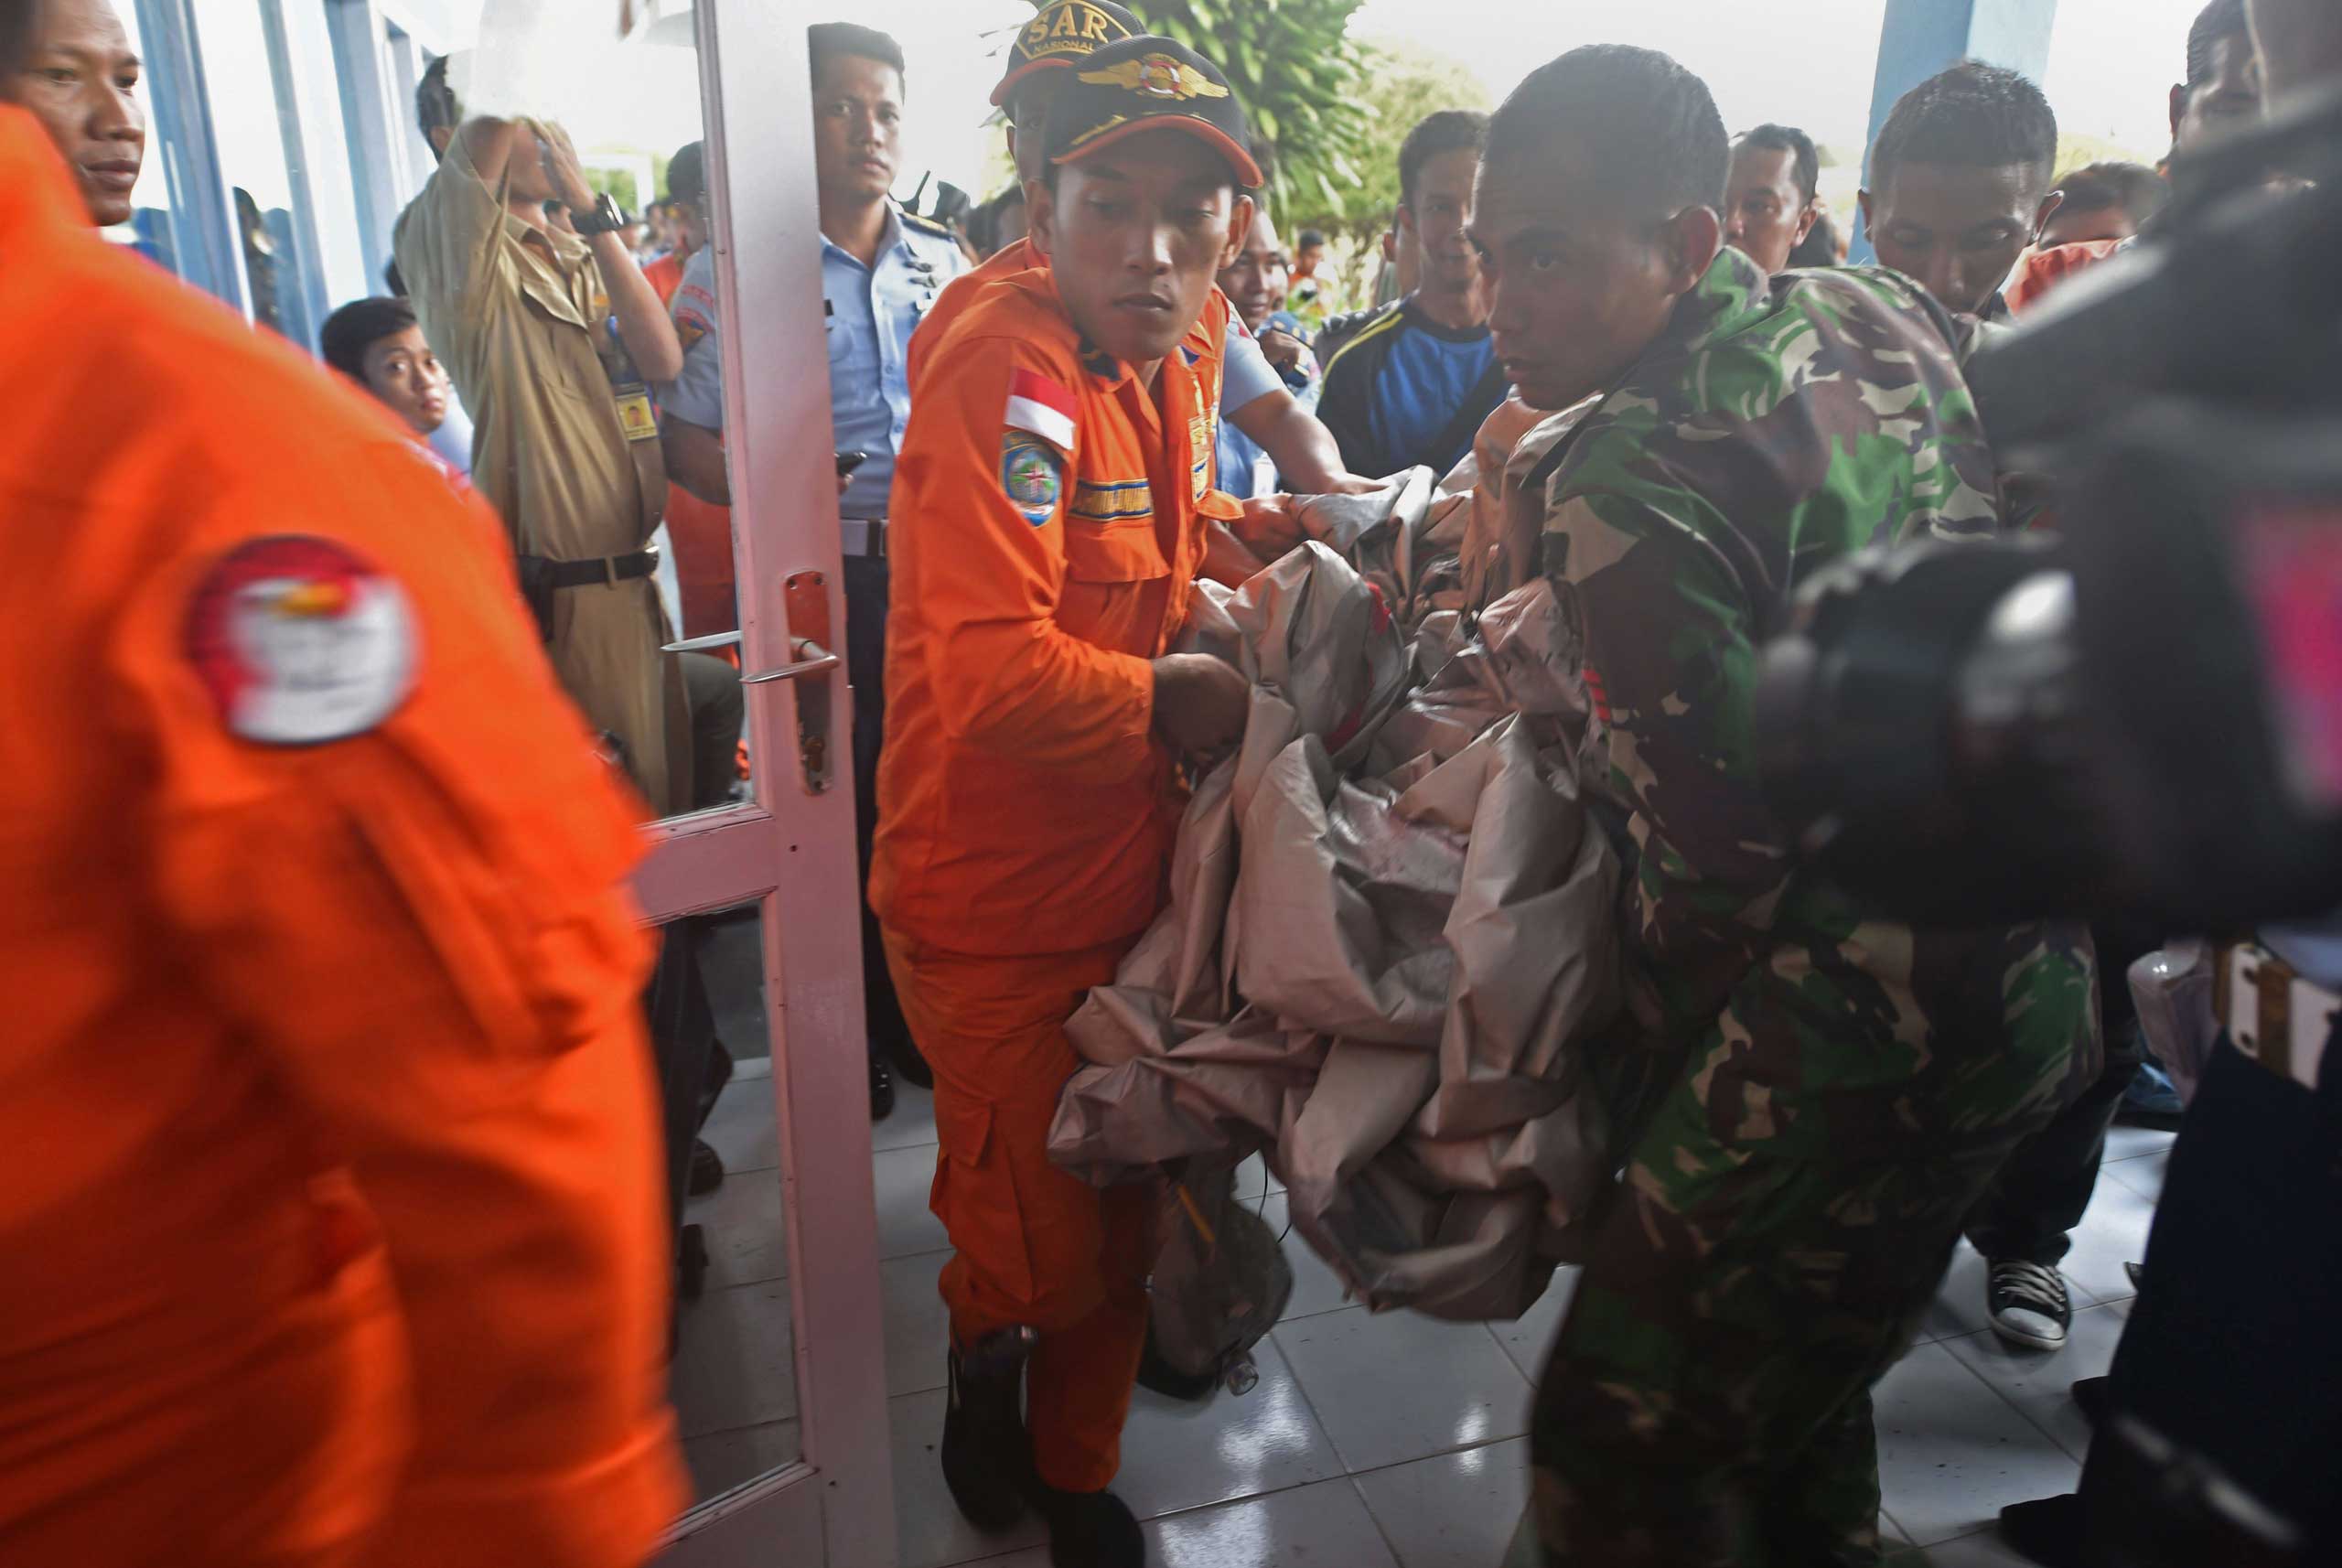 Members of the Indonesian air force carry items retrieved from the Java sea during search and rescue operations for the missing AirAsia flight QZ8501, in Pangkalan Bun, Indonesia on Dec. 30, 2014.